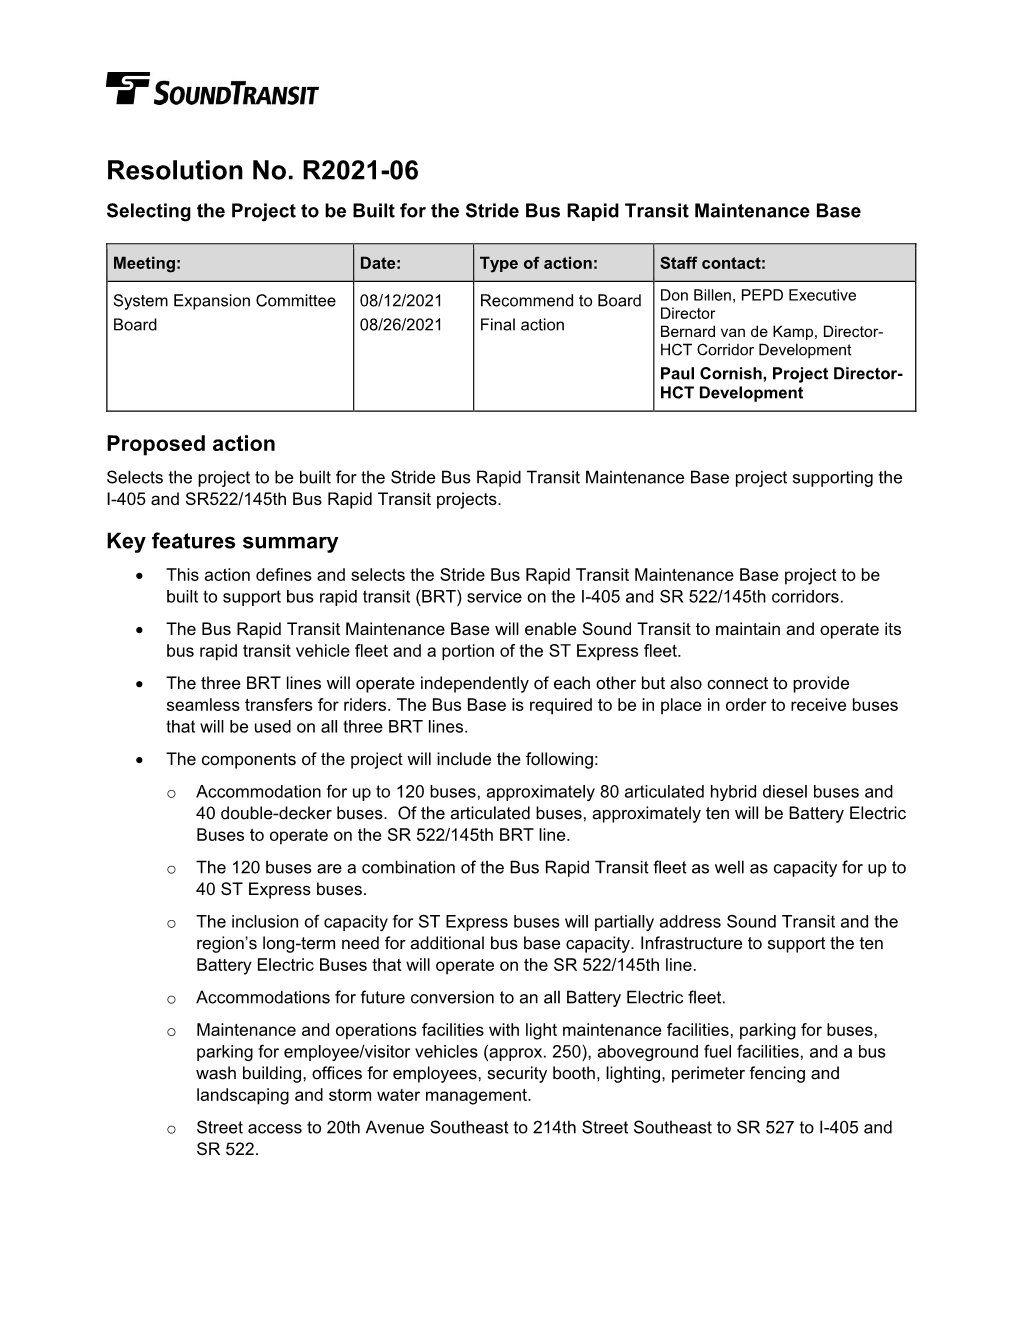 Resolution No. R2021-06 Selecting the Project to Be Built for the Stride Bus Rapid Transit Maintenance Base